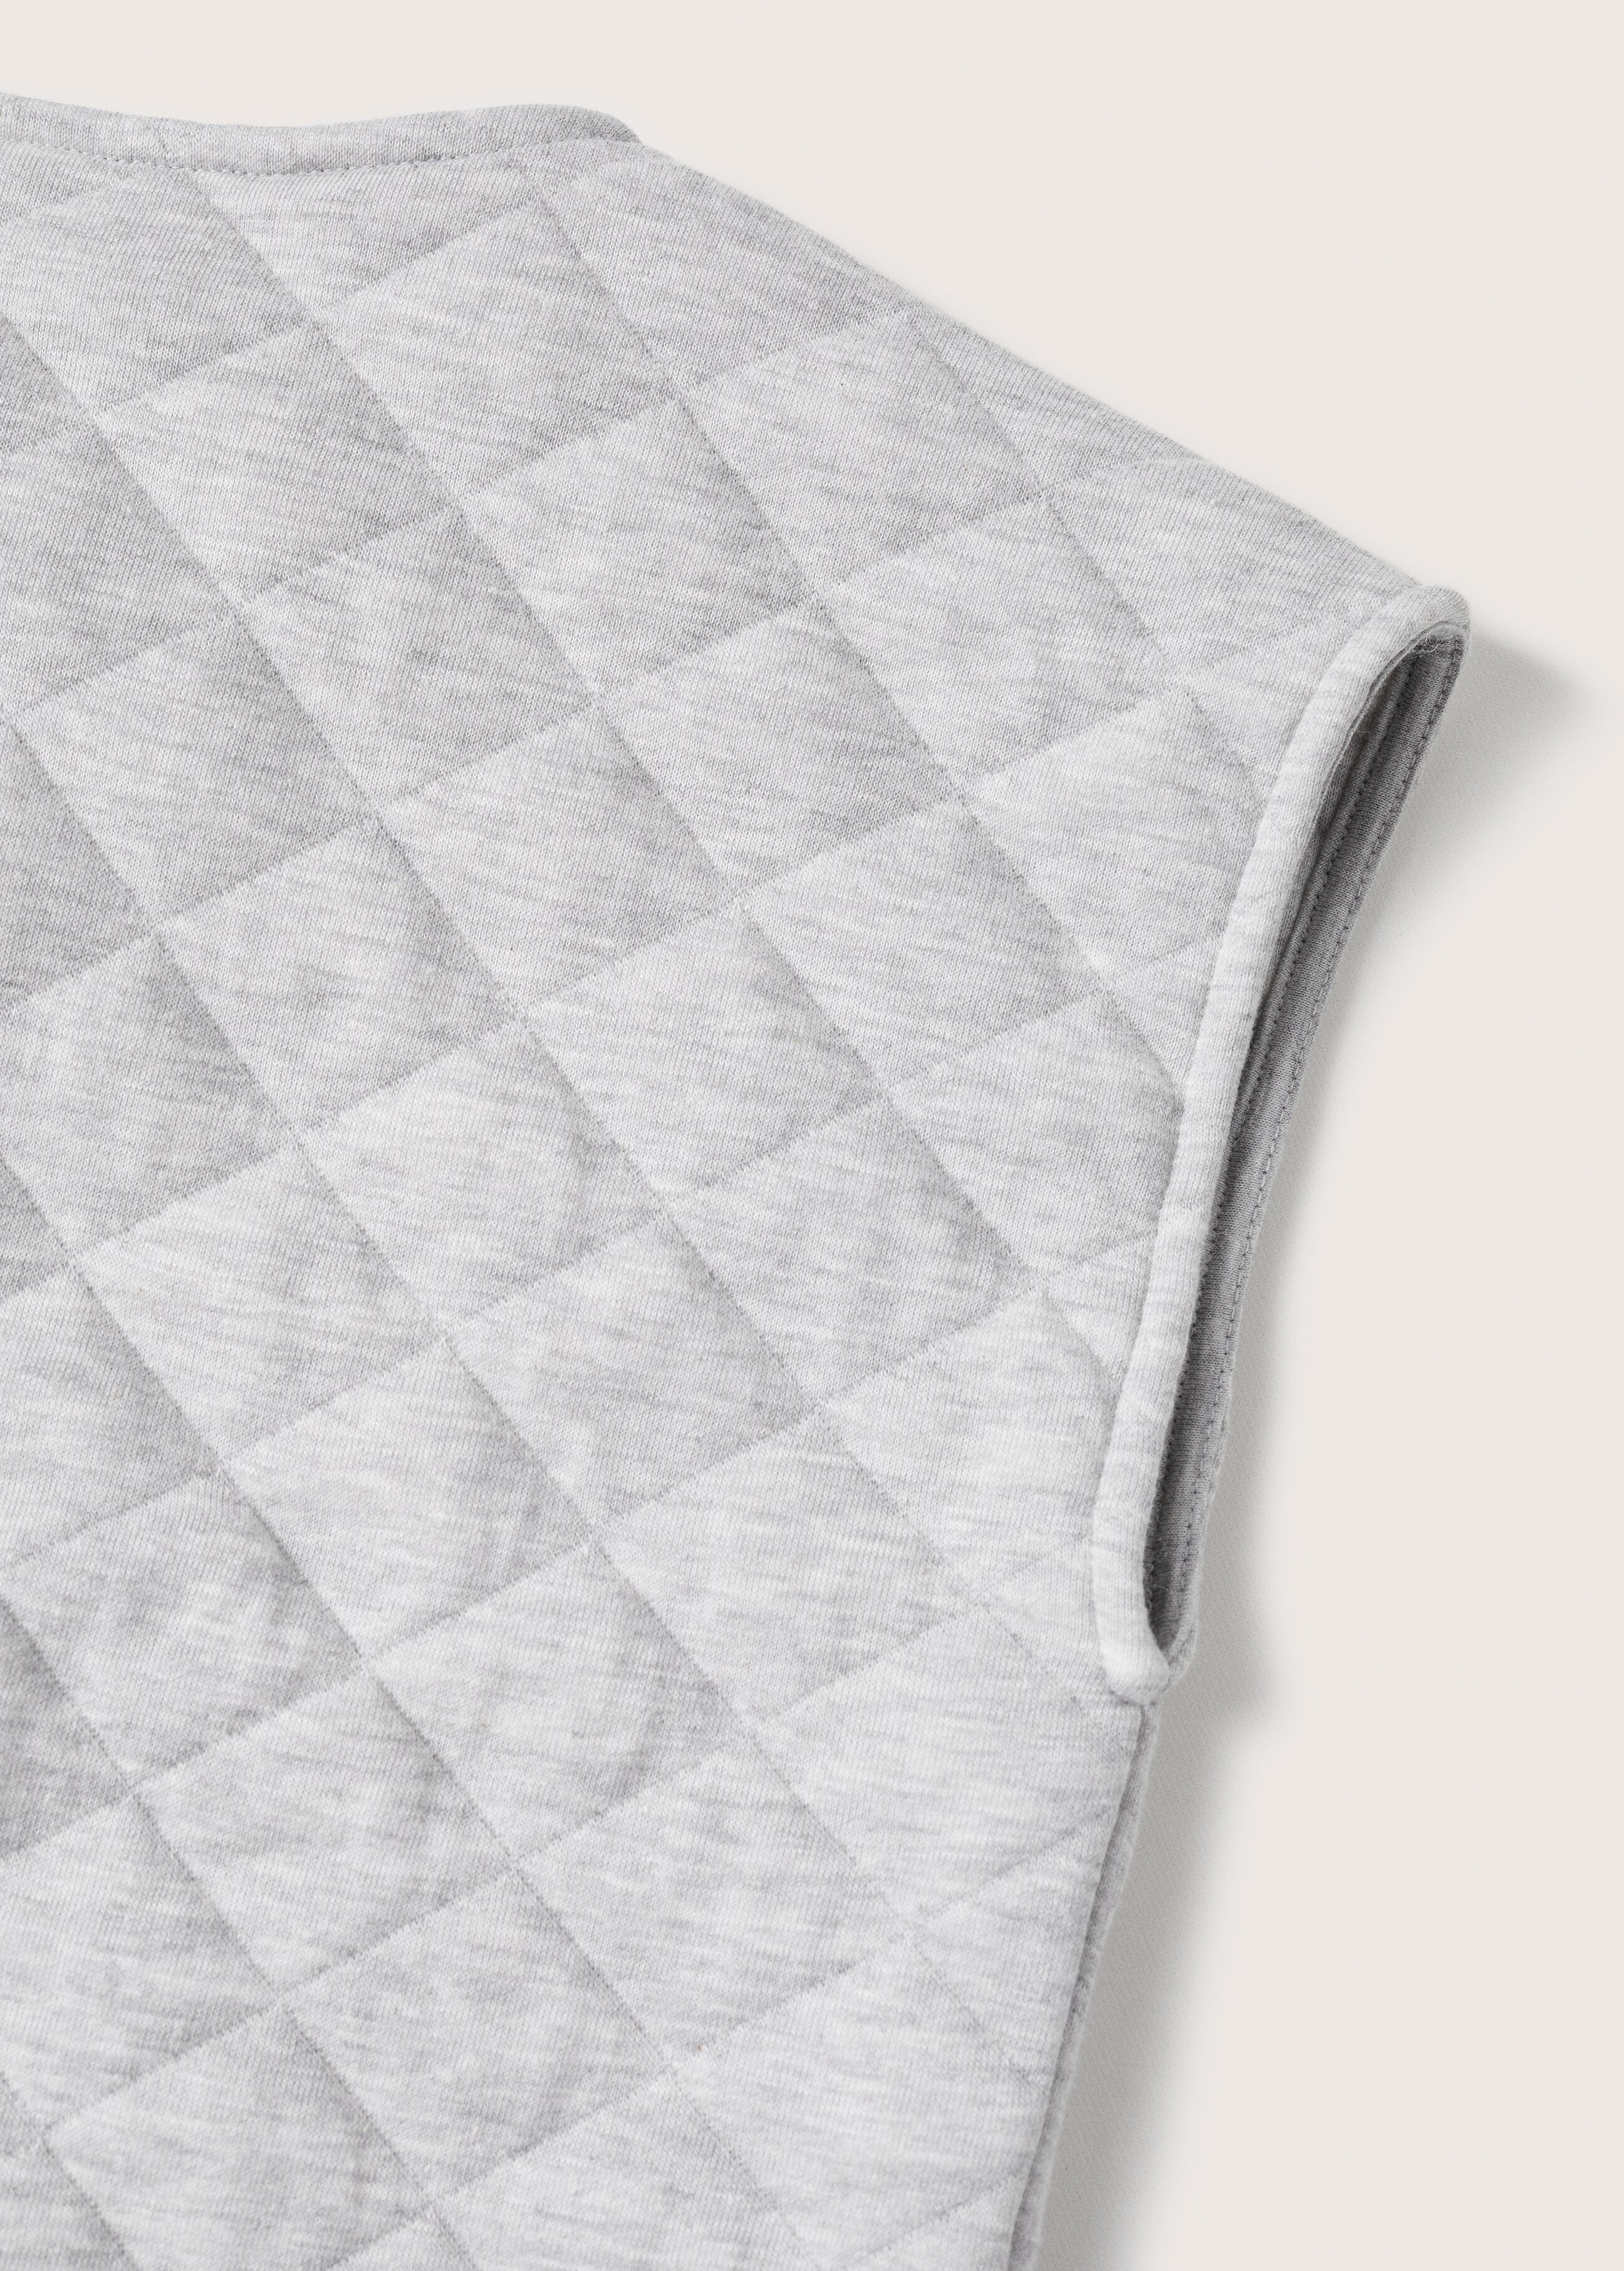 Quilted gilet - Details of the article 8